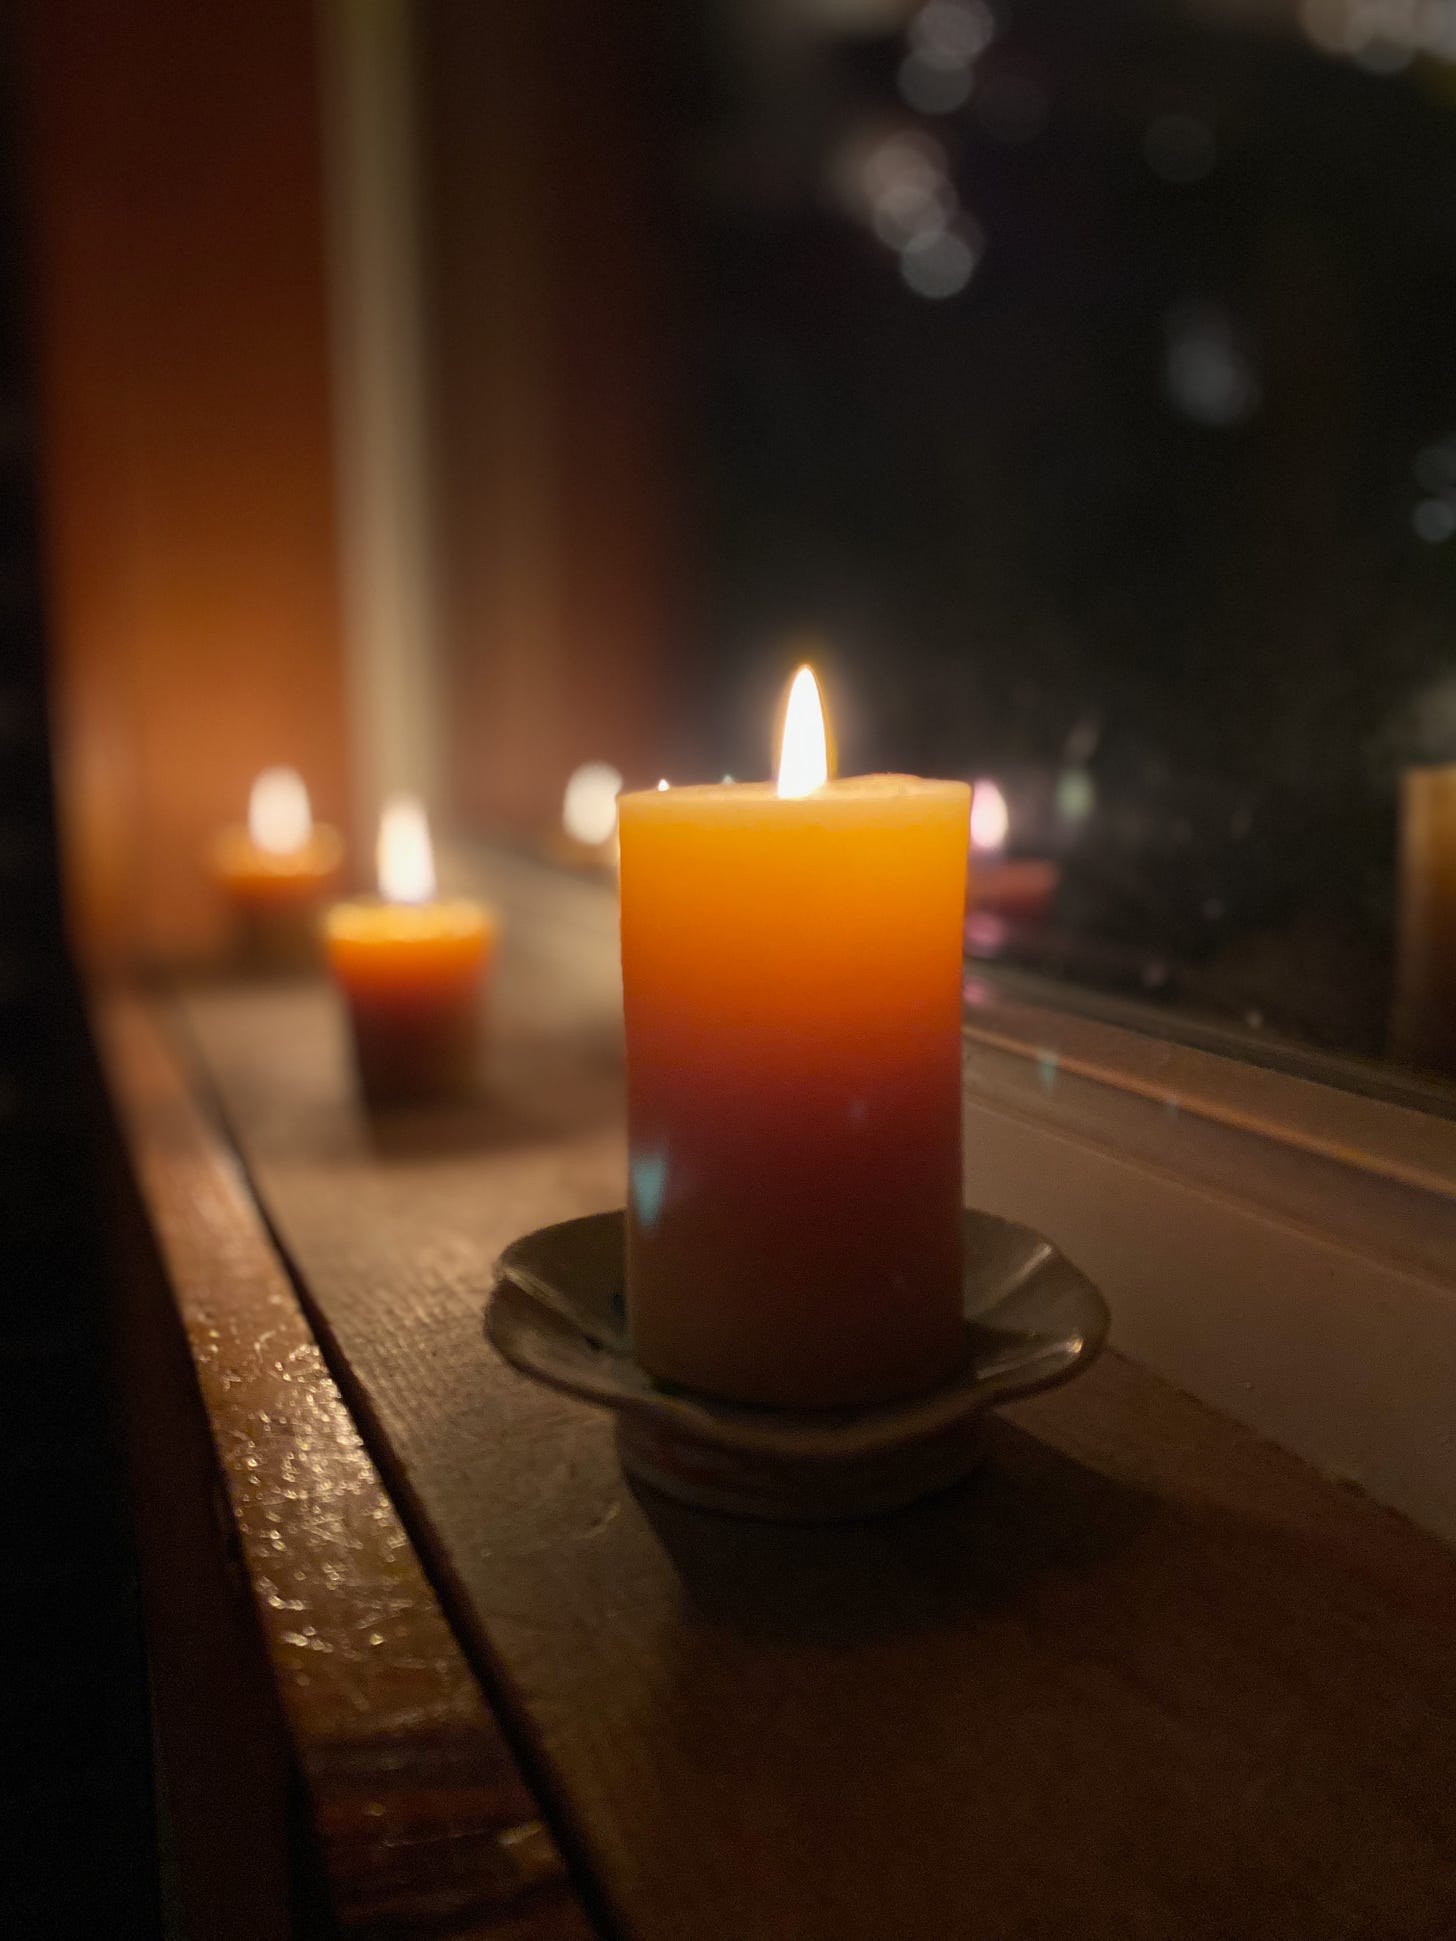 Three beeswax candles lined up on a windowsill, in front of a dark window.